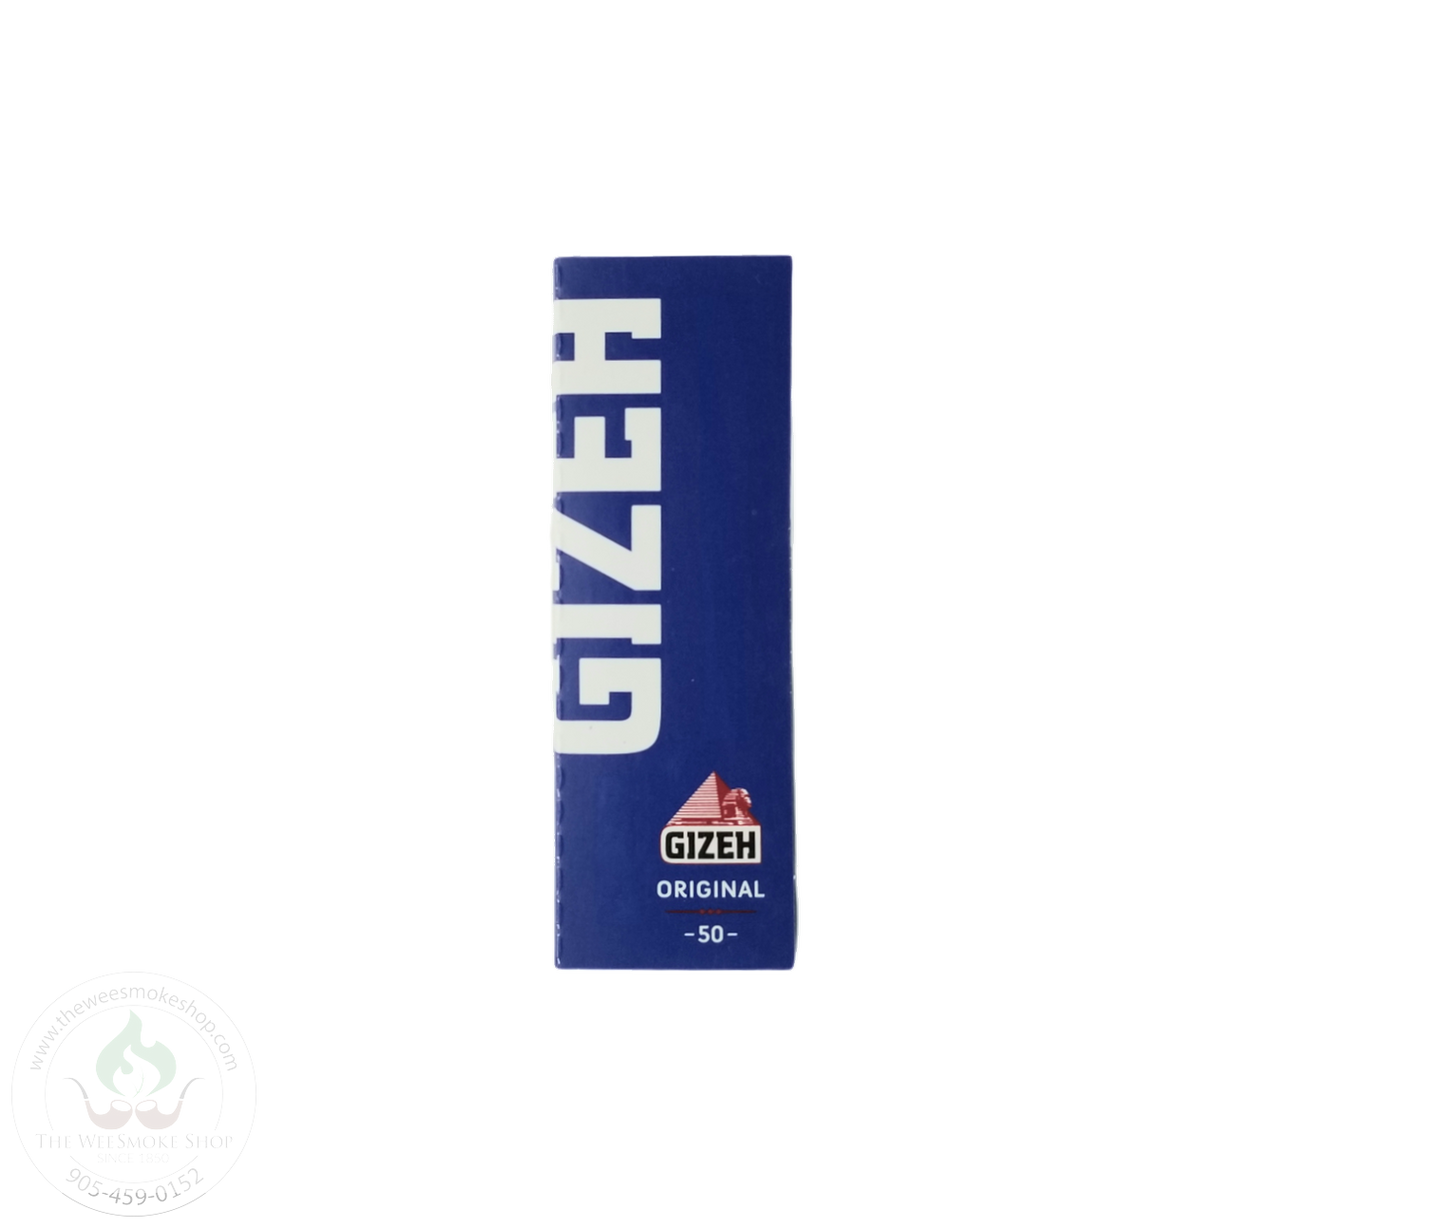 Gizeh Original Rolling Papers, Blue Pack-1 1/4. 50 papers per pack. The Wee Smoke Shop